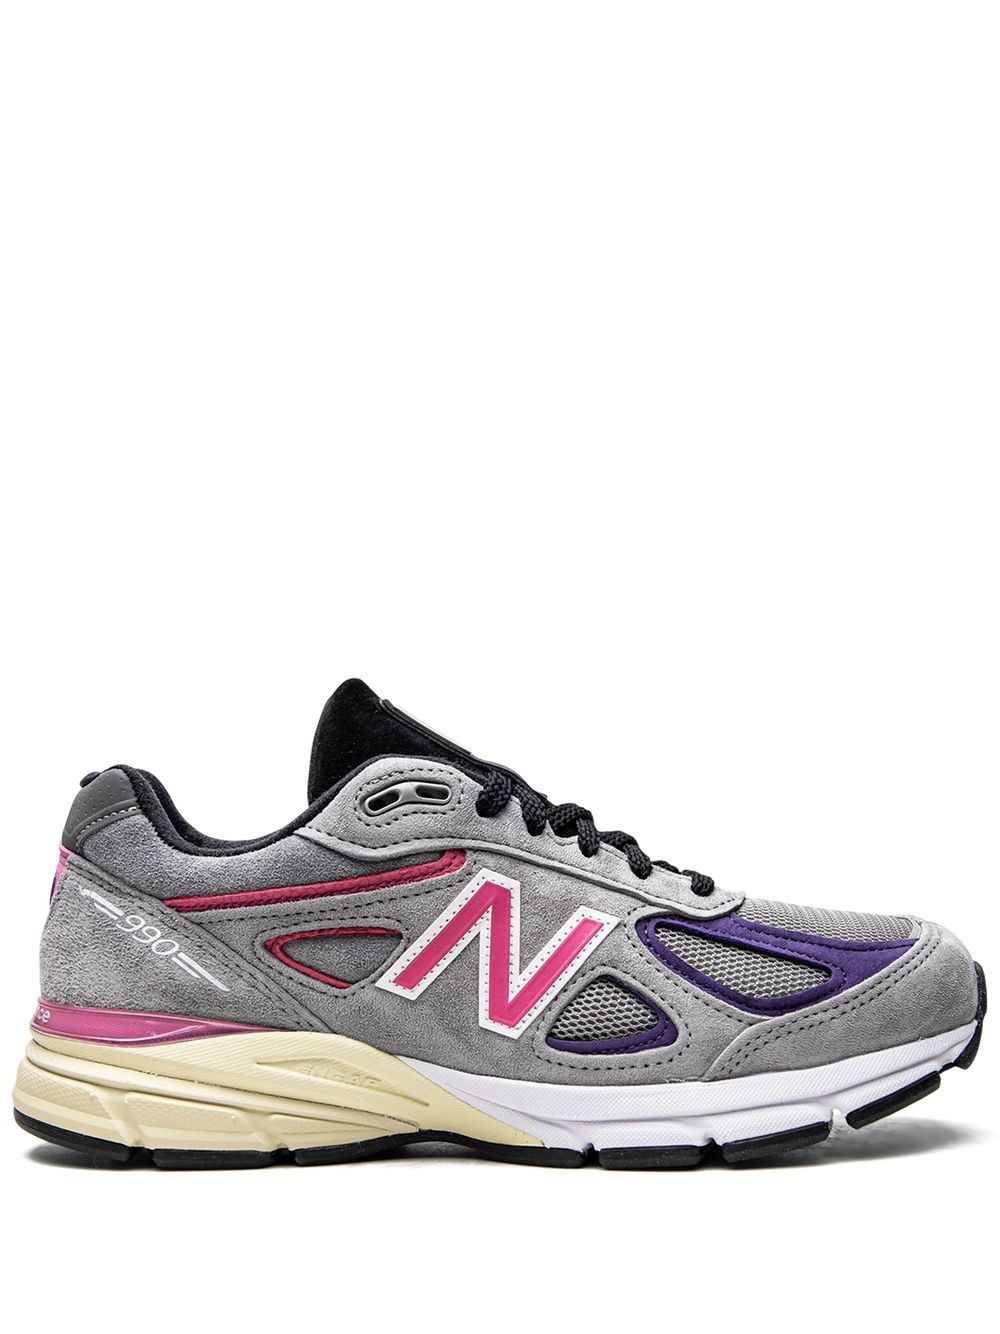 New Balance 990 V4 low-top sneakers - Grey